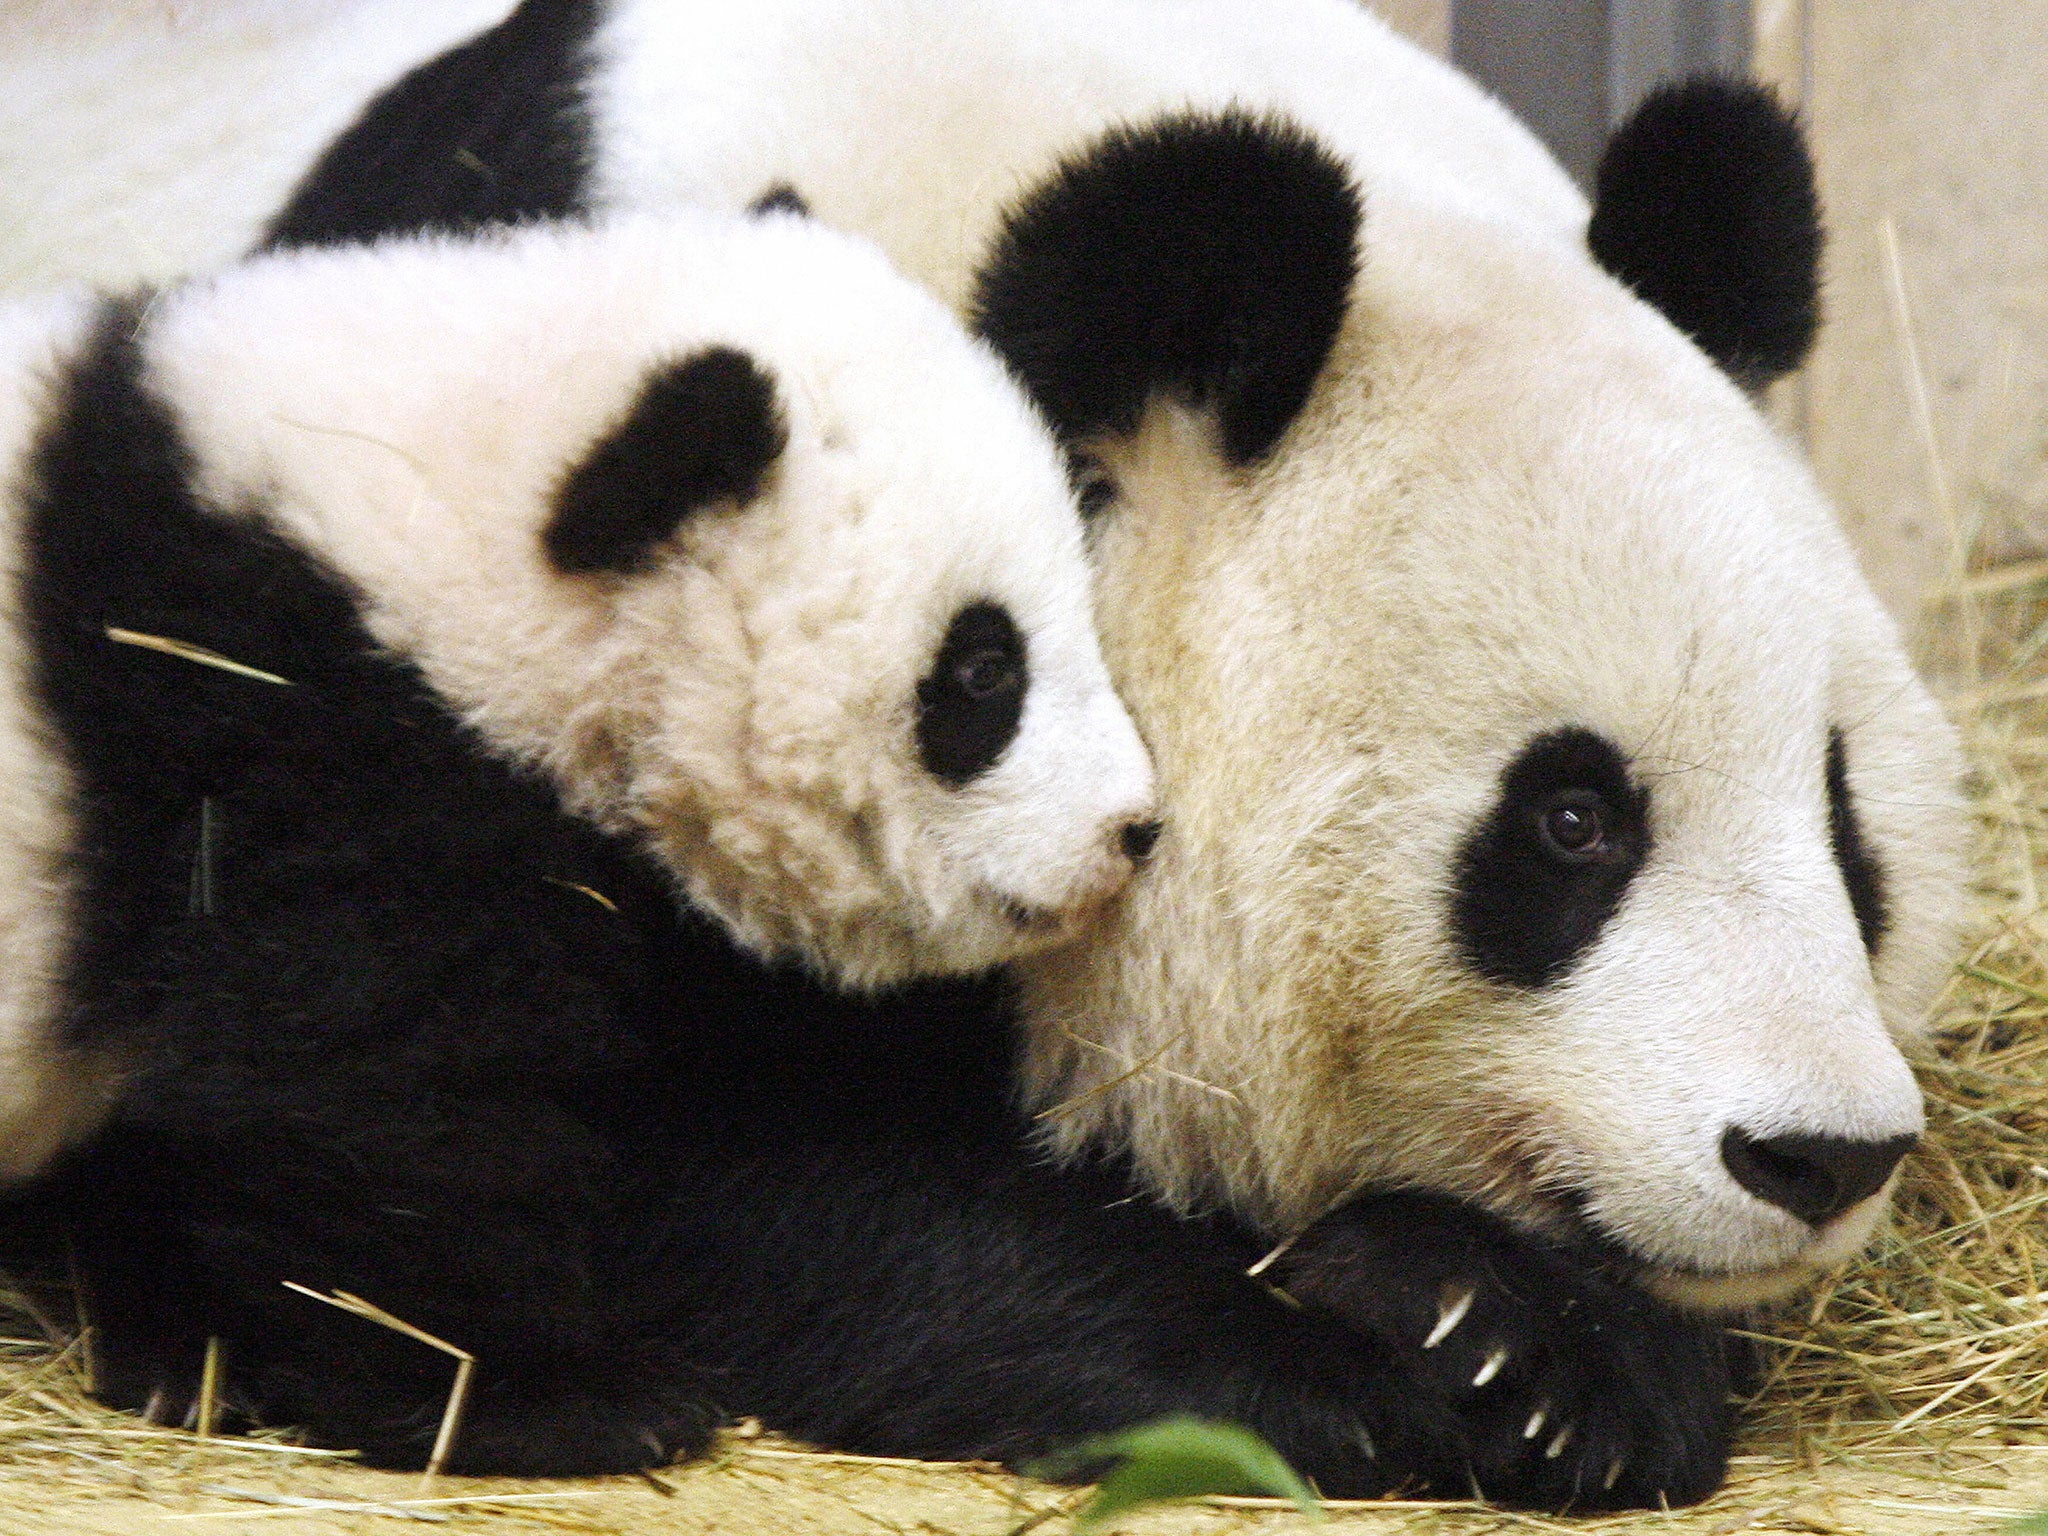 10 people have been arrested for allegedly selling off Panda parts